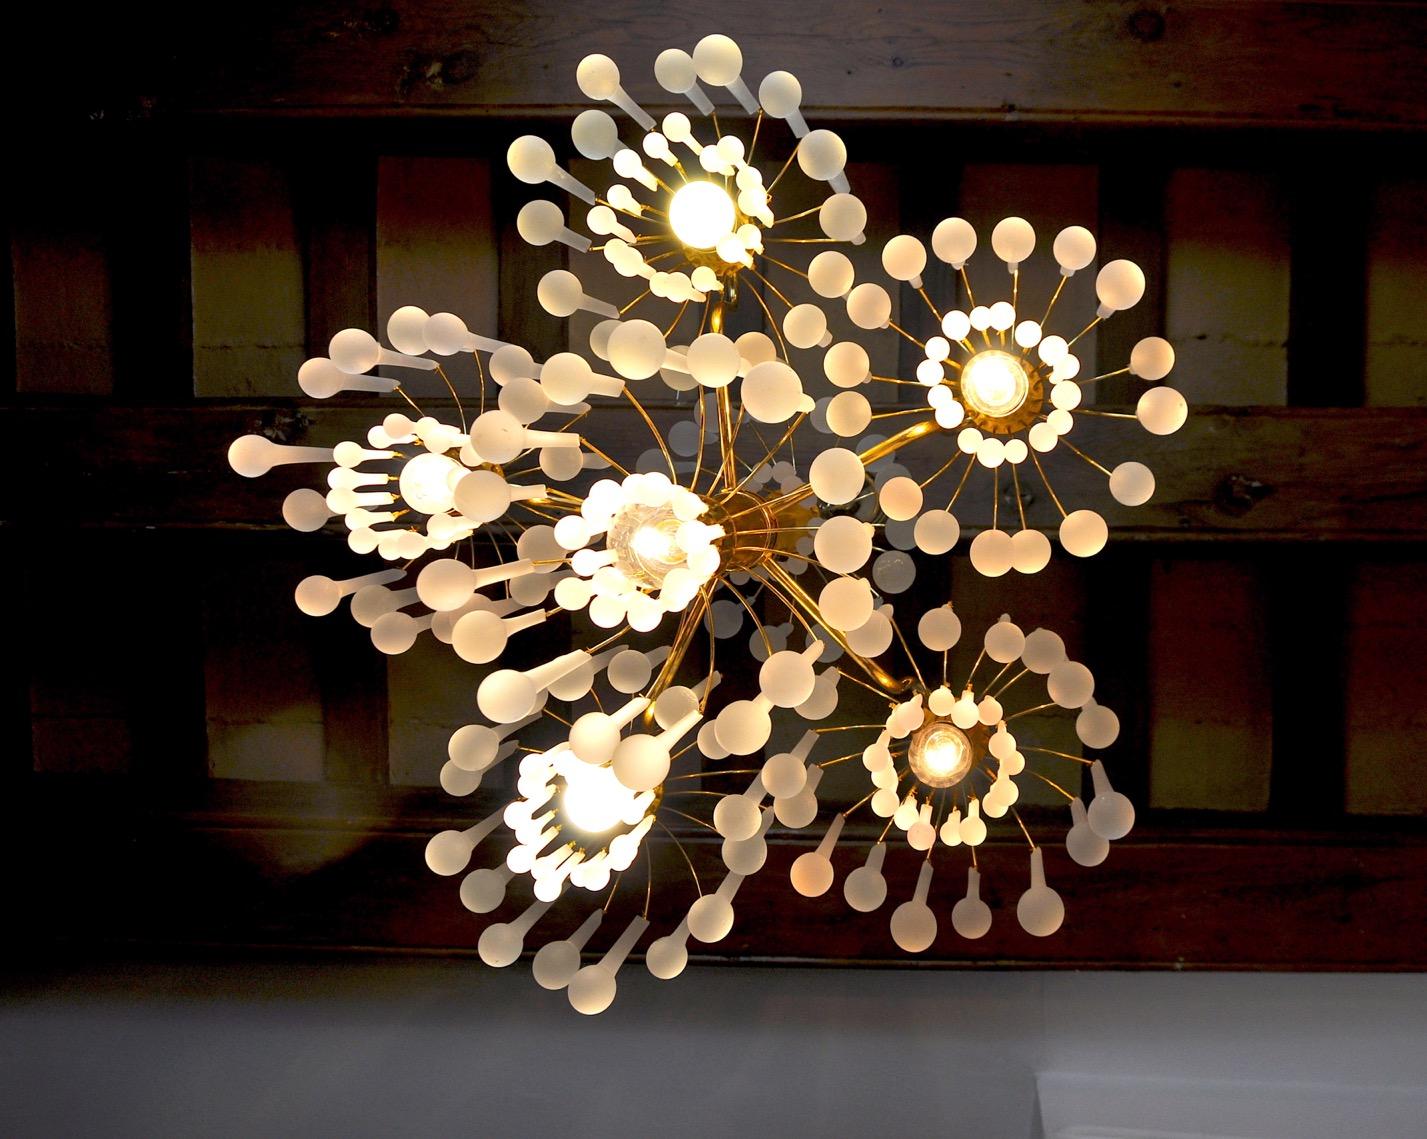 Mid-20th Century Drop Chandelier by Venini, 5 Arms, Murano Glass, Italy, 1960 For Sale